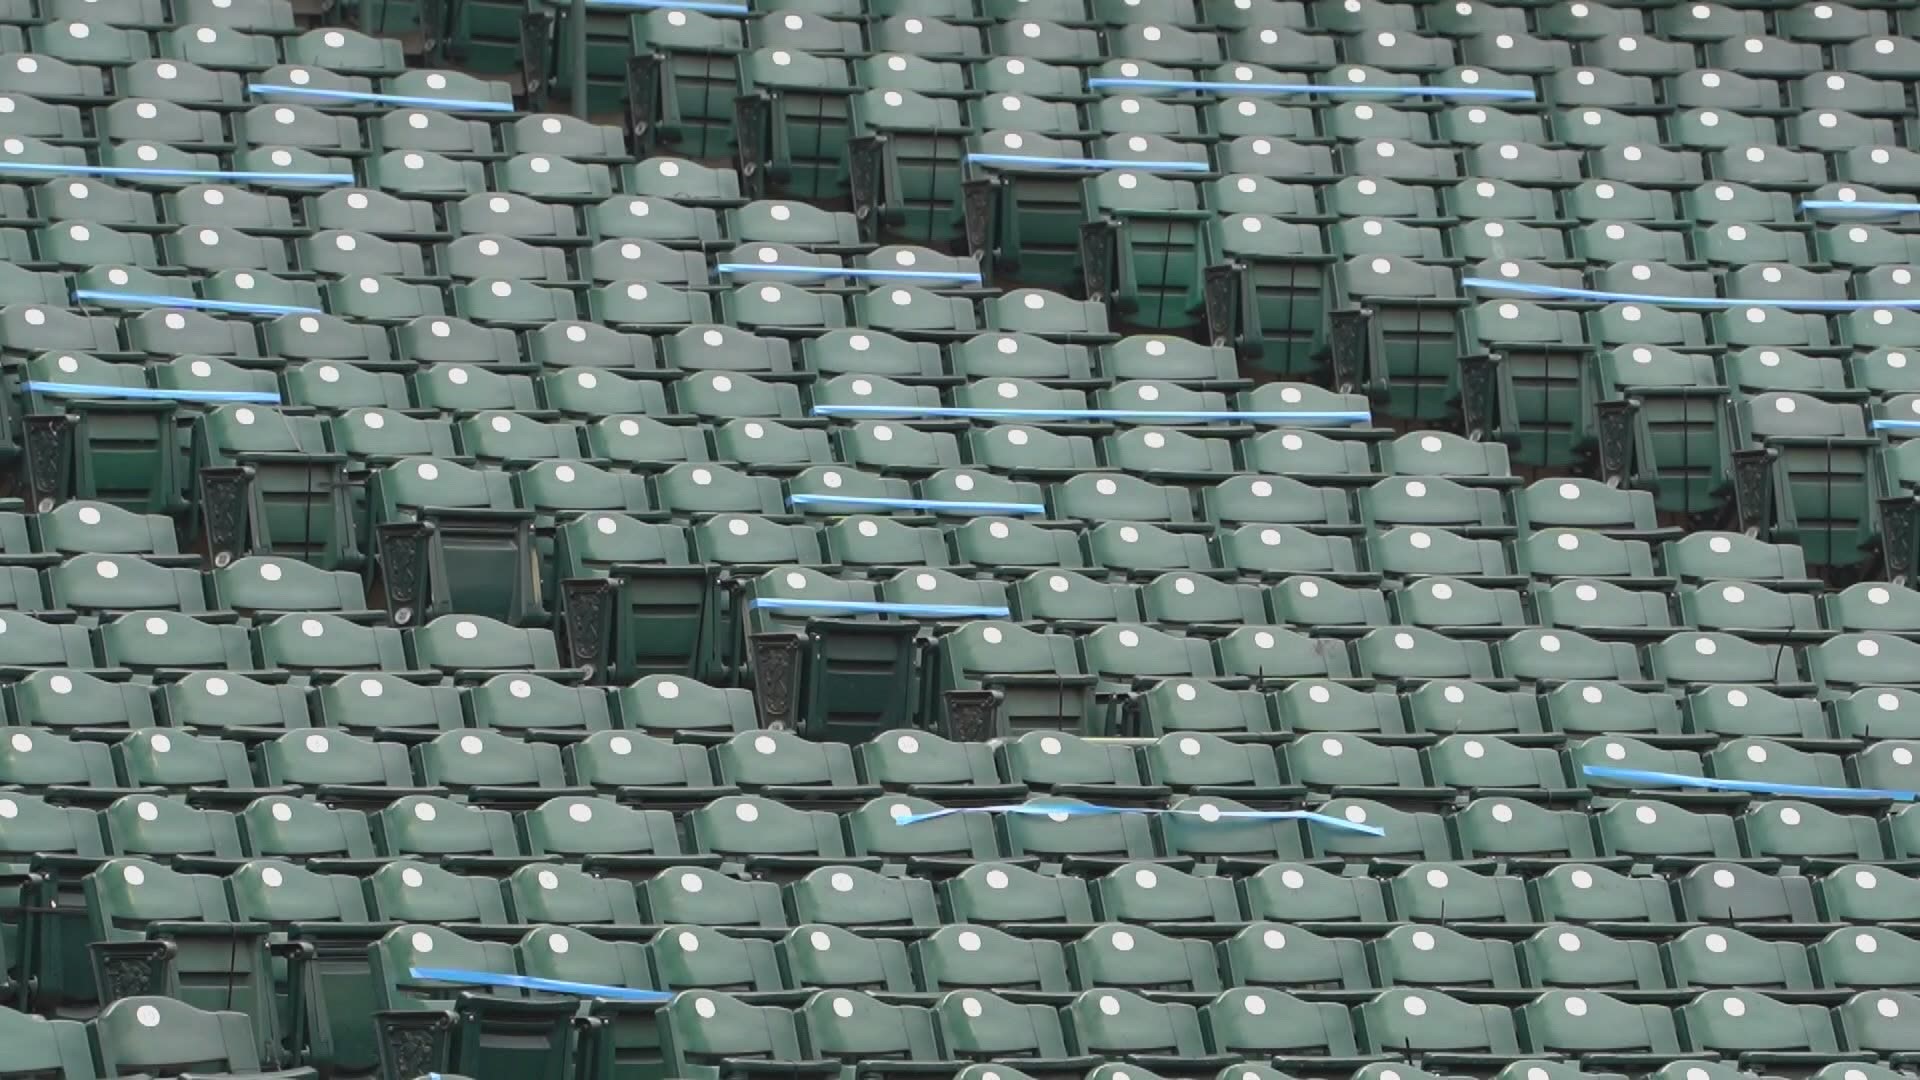 T-Mobile Park can operate at full capacity for the Mariners’ home game against the Rangers on Friday.